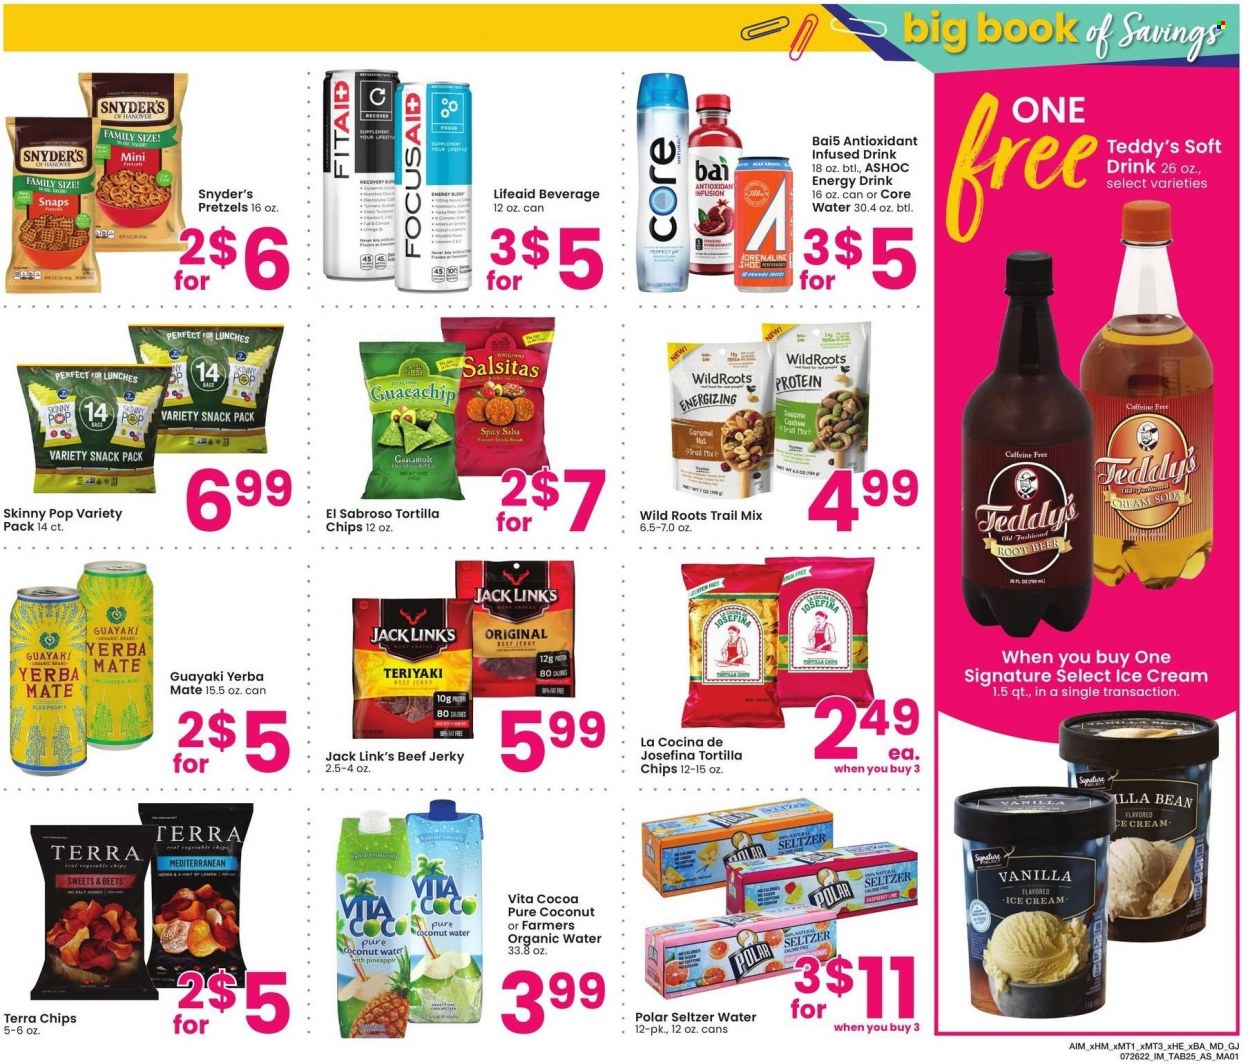 thumbnail - Albertsons Flyer - 07/26/2022 - 08/29/2022 - Sales products - pretzels, pineapple, oranges, beef jerky, jerky, guacamole, ice cream, tortilla chips, chips, vegetable chips, Skinny Pop, Jack Link's, cocoa, herbs, caramel, salsa, trail mix, energy drink, coconut water, soft drink, Bai, seltzer water, beer, bag, pomegranate. Page 25.